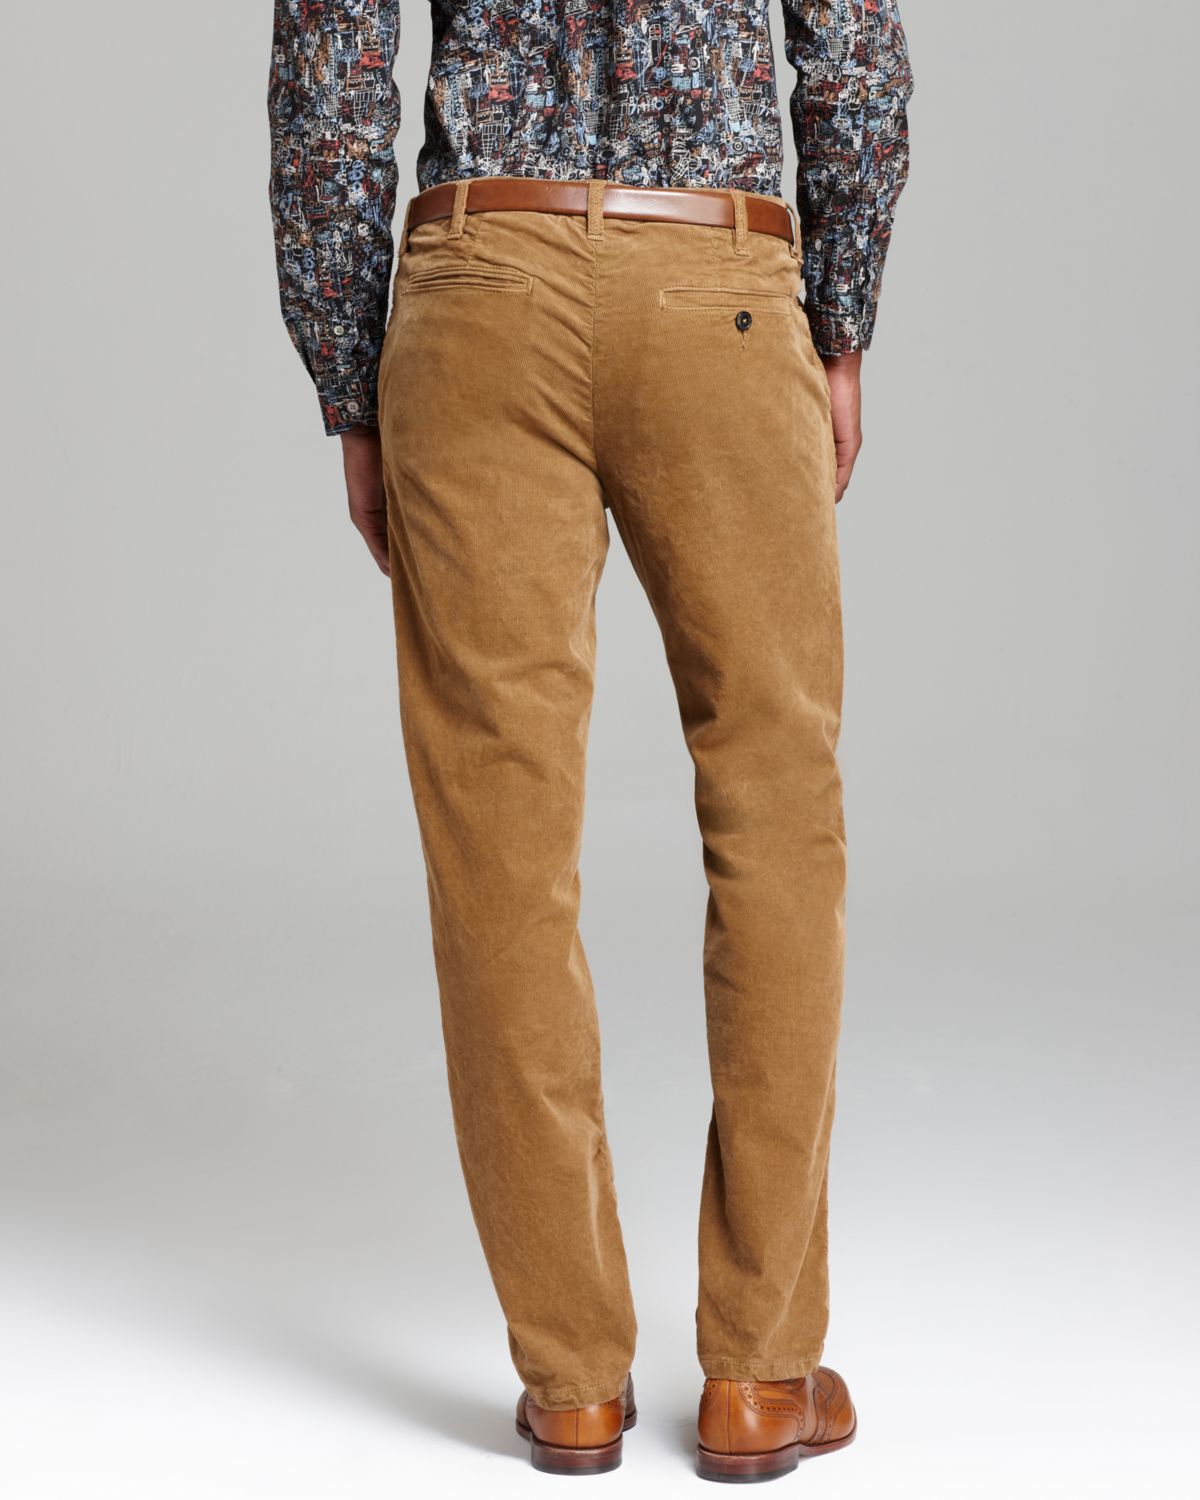 Lyst - Paul smith Cords Tapered Slim Fit in Tan in Brown for Men